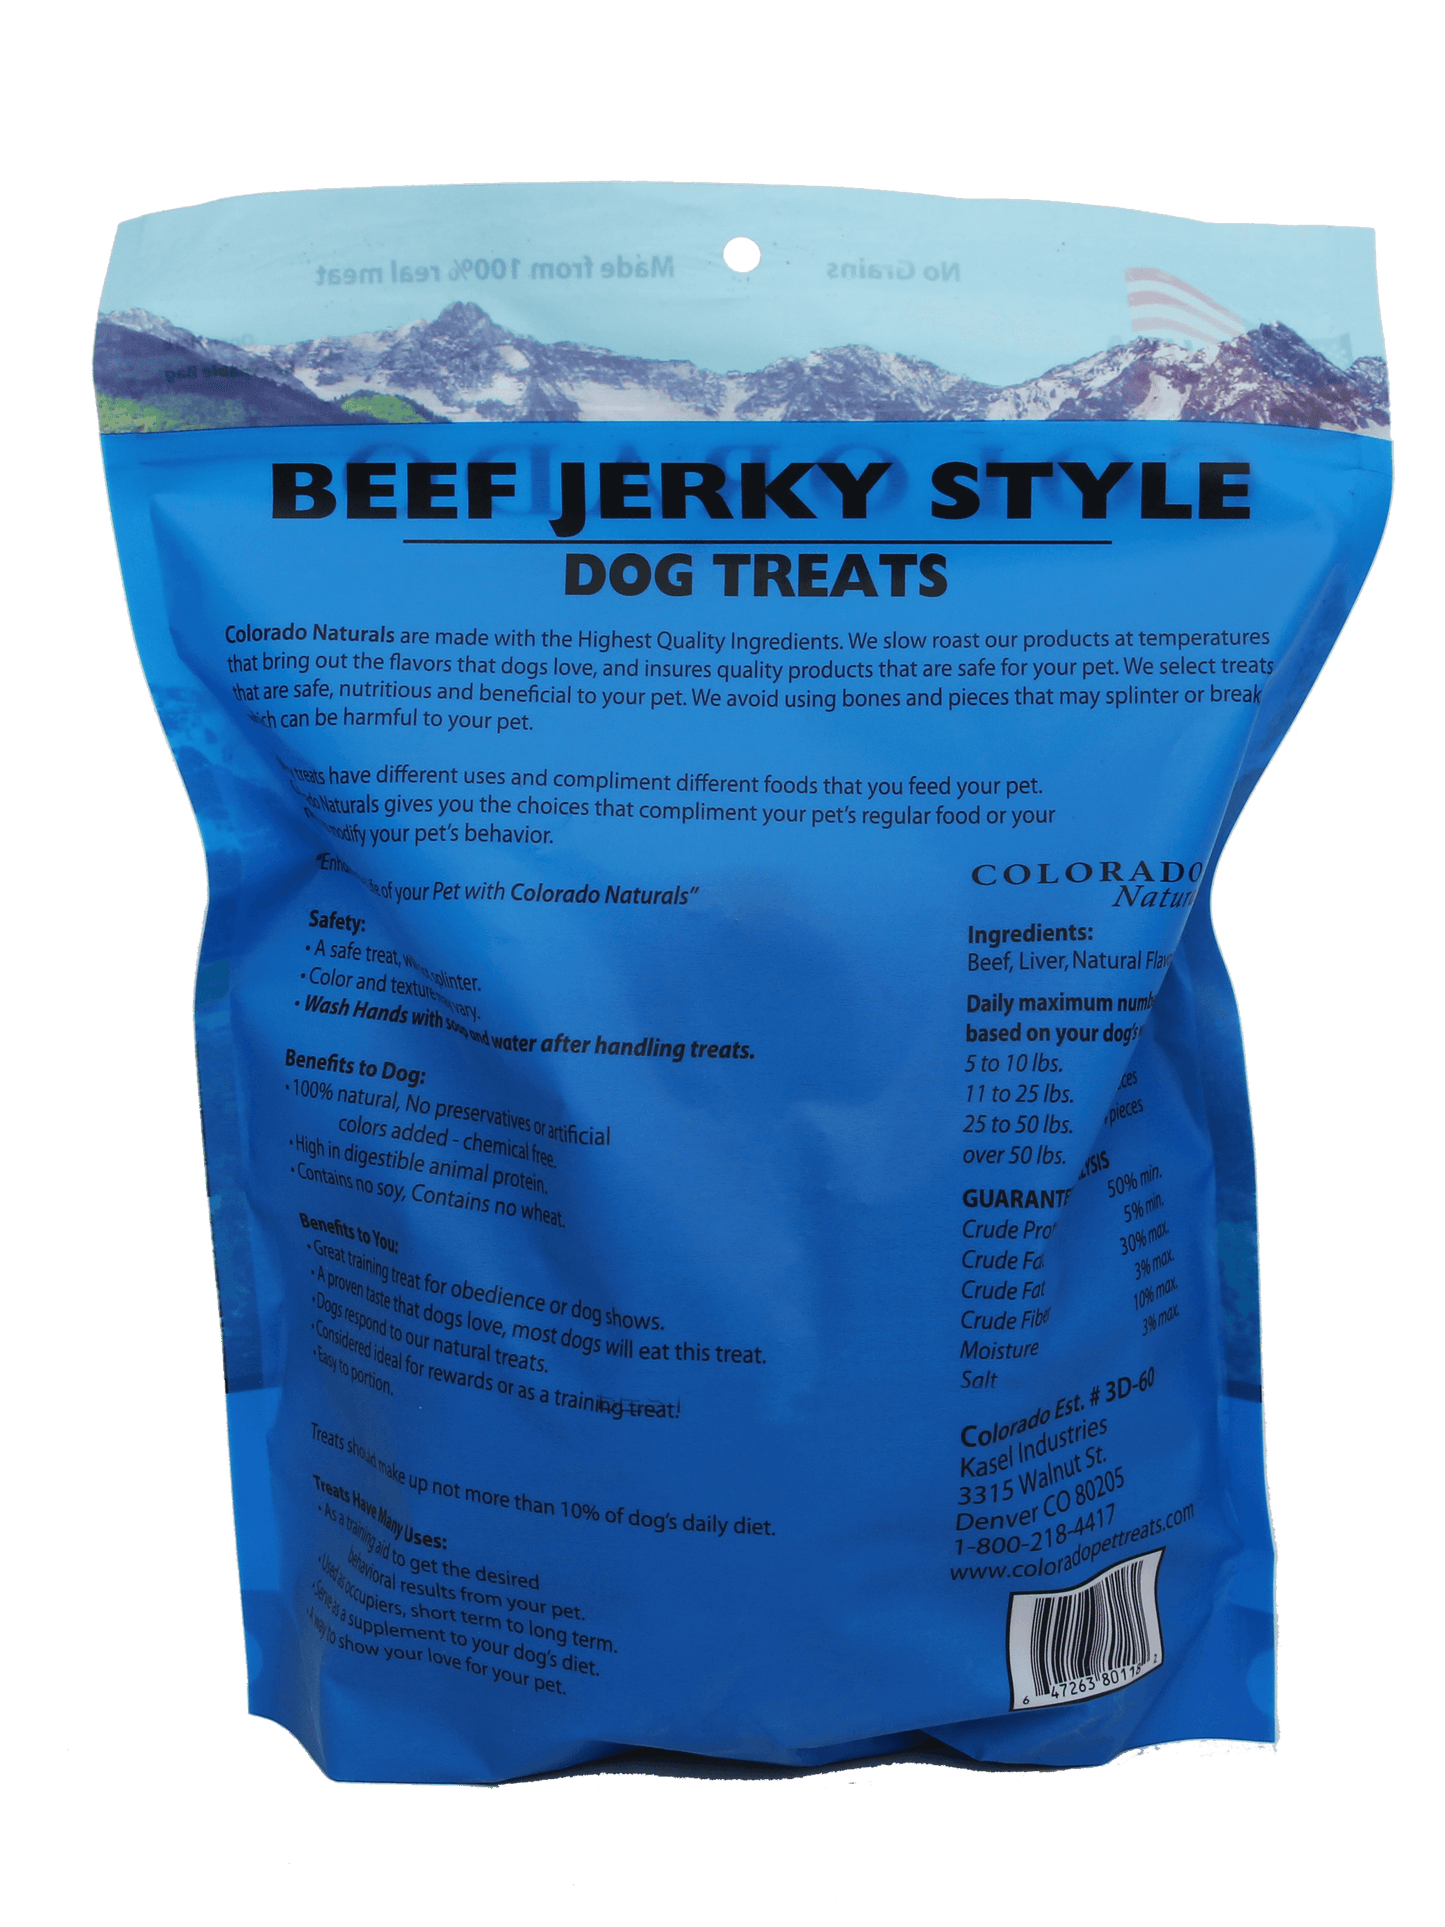 A photo of the back of the best 16 oz Beef Jerky Dog Treats from Colorado Pet Treats by Colorado Naturals. Colorado Pet Treats - All-Natural, All-American Dog Jerky, Jerky Chips, and Bones - Treat your furry friend to our delicious and healthy pet treats made with only the finest ingredients sourced in the USA. Delicious and chewy all-American dog jerky made with natural ingredients sourced in Colorado.